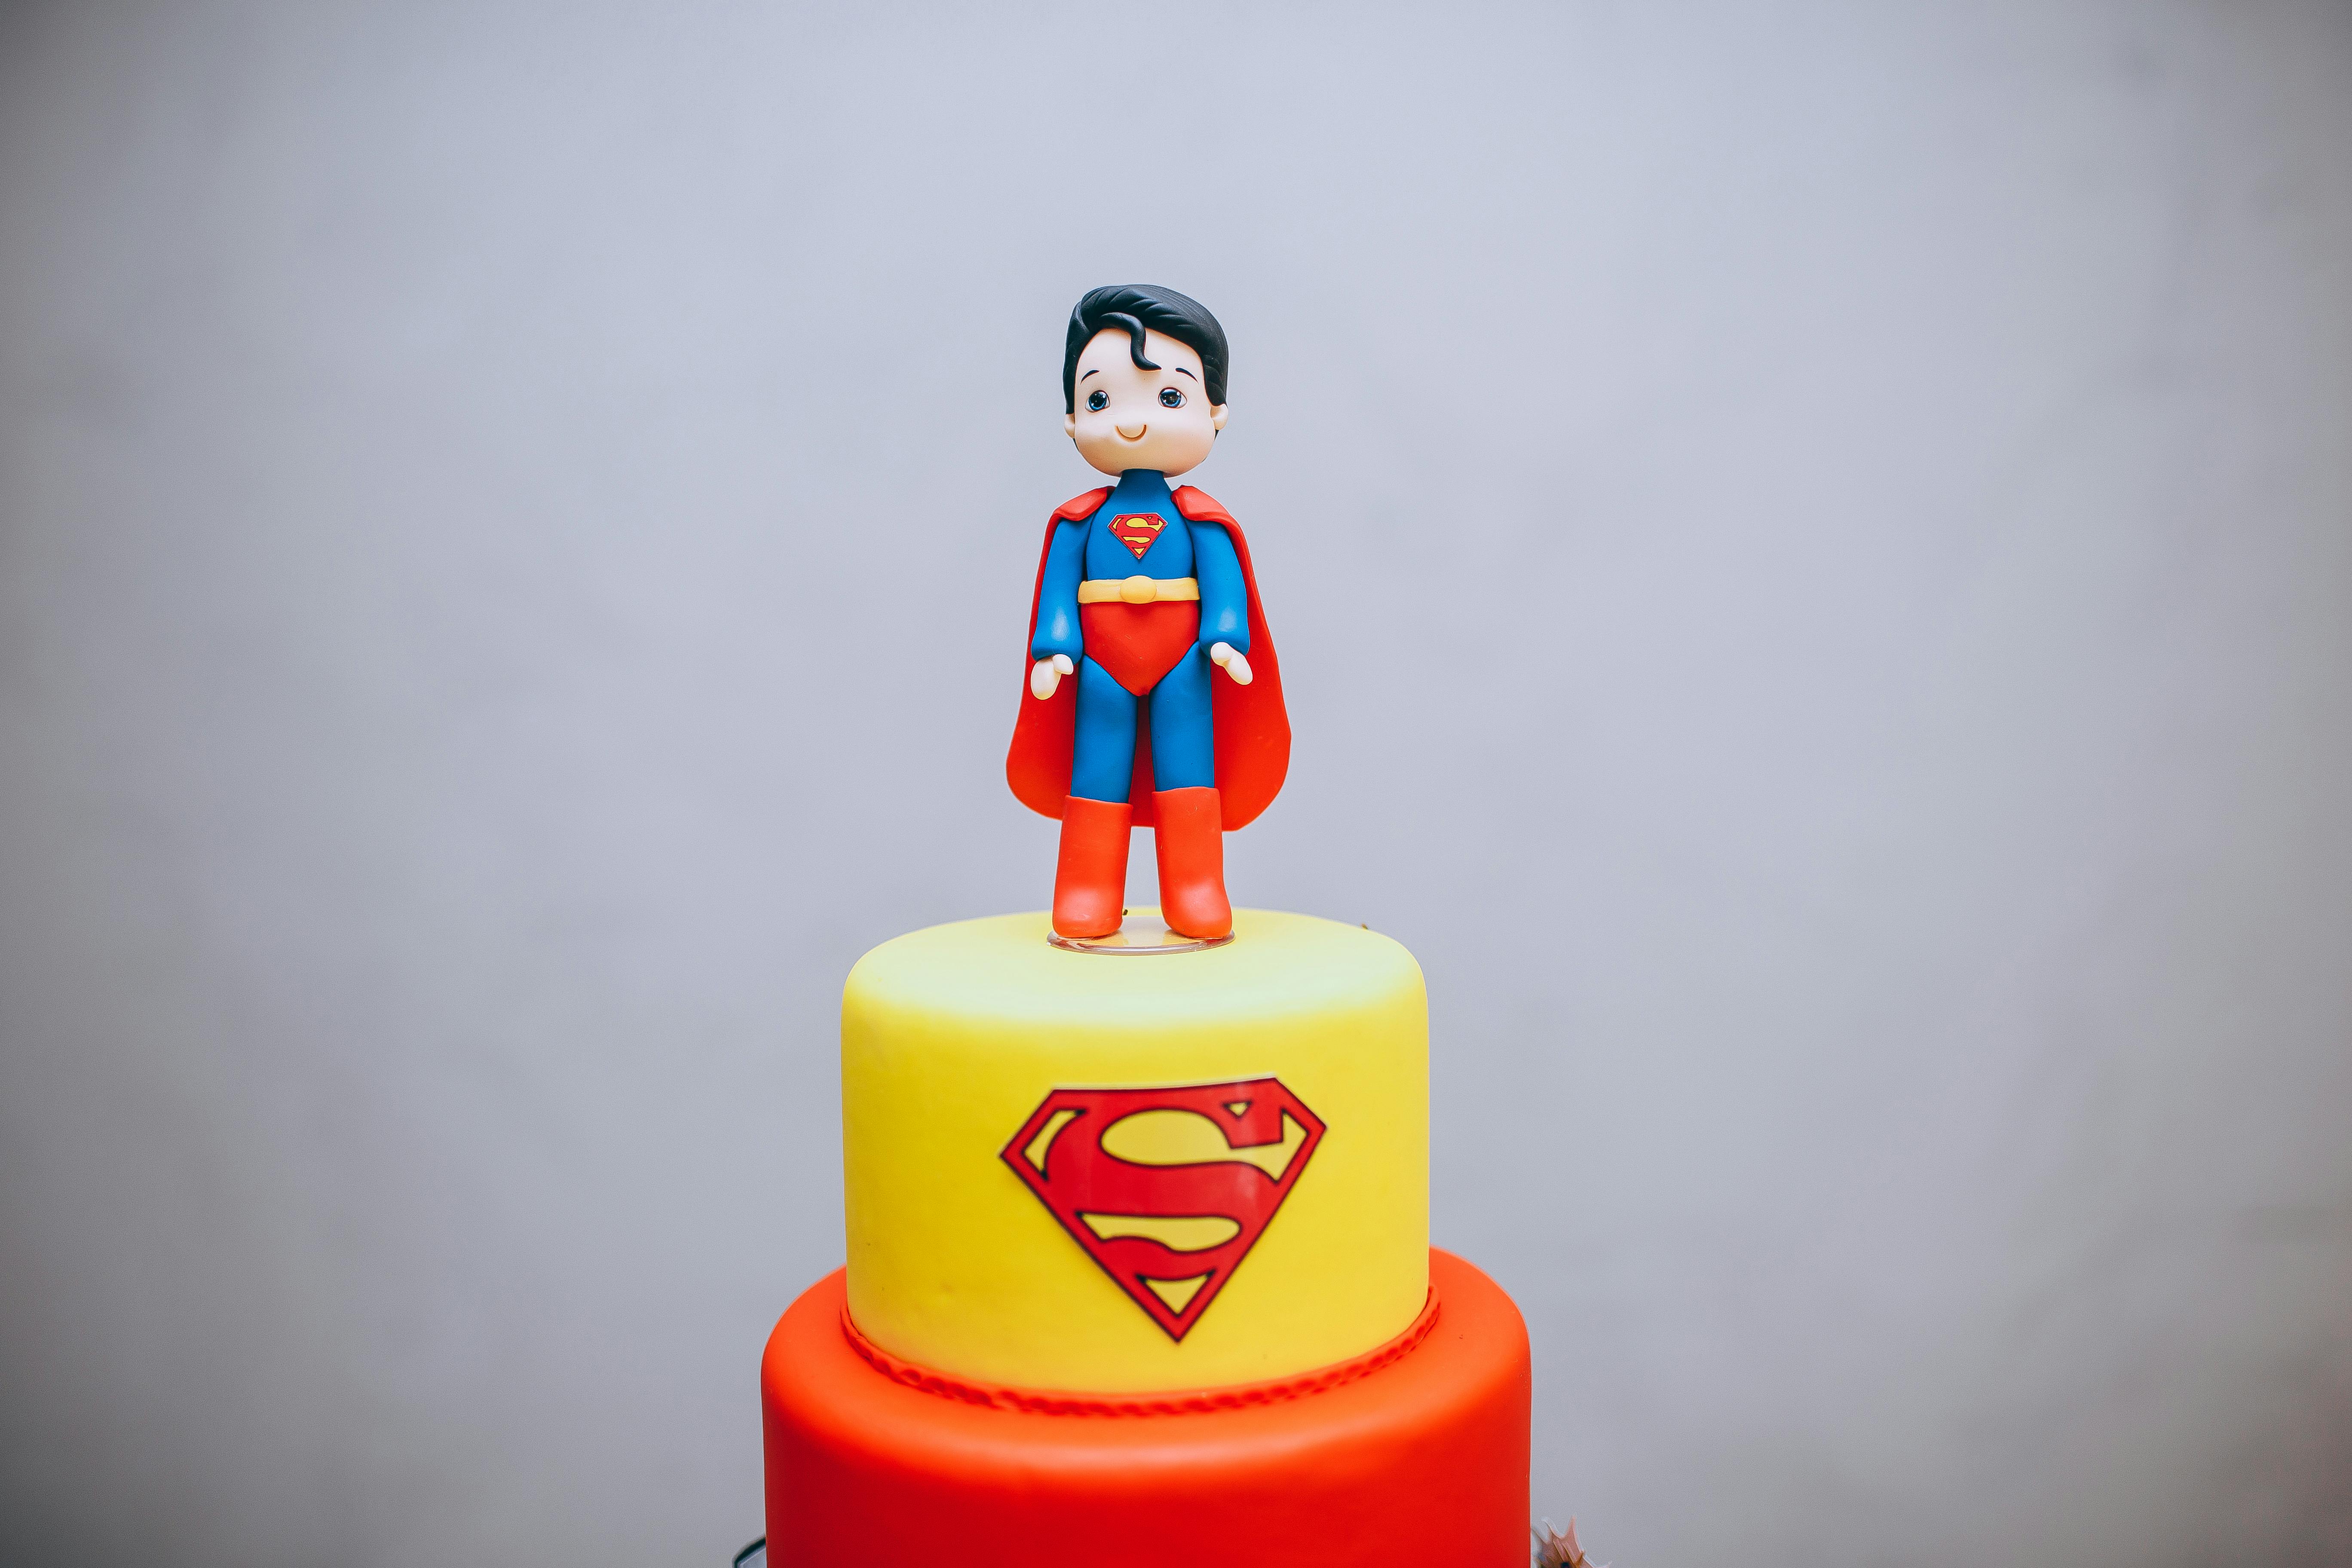 Superman Cake - Perfect for your next Superhero party